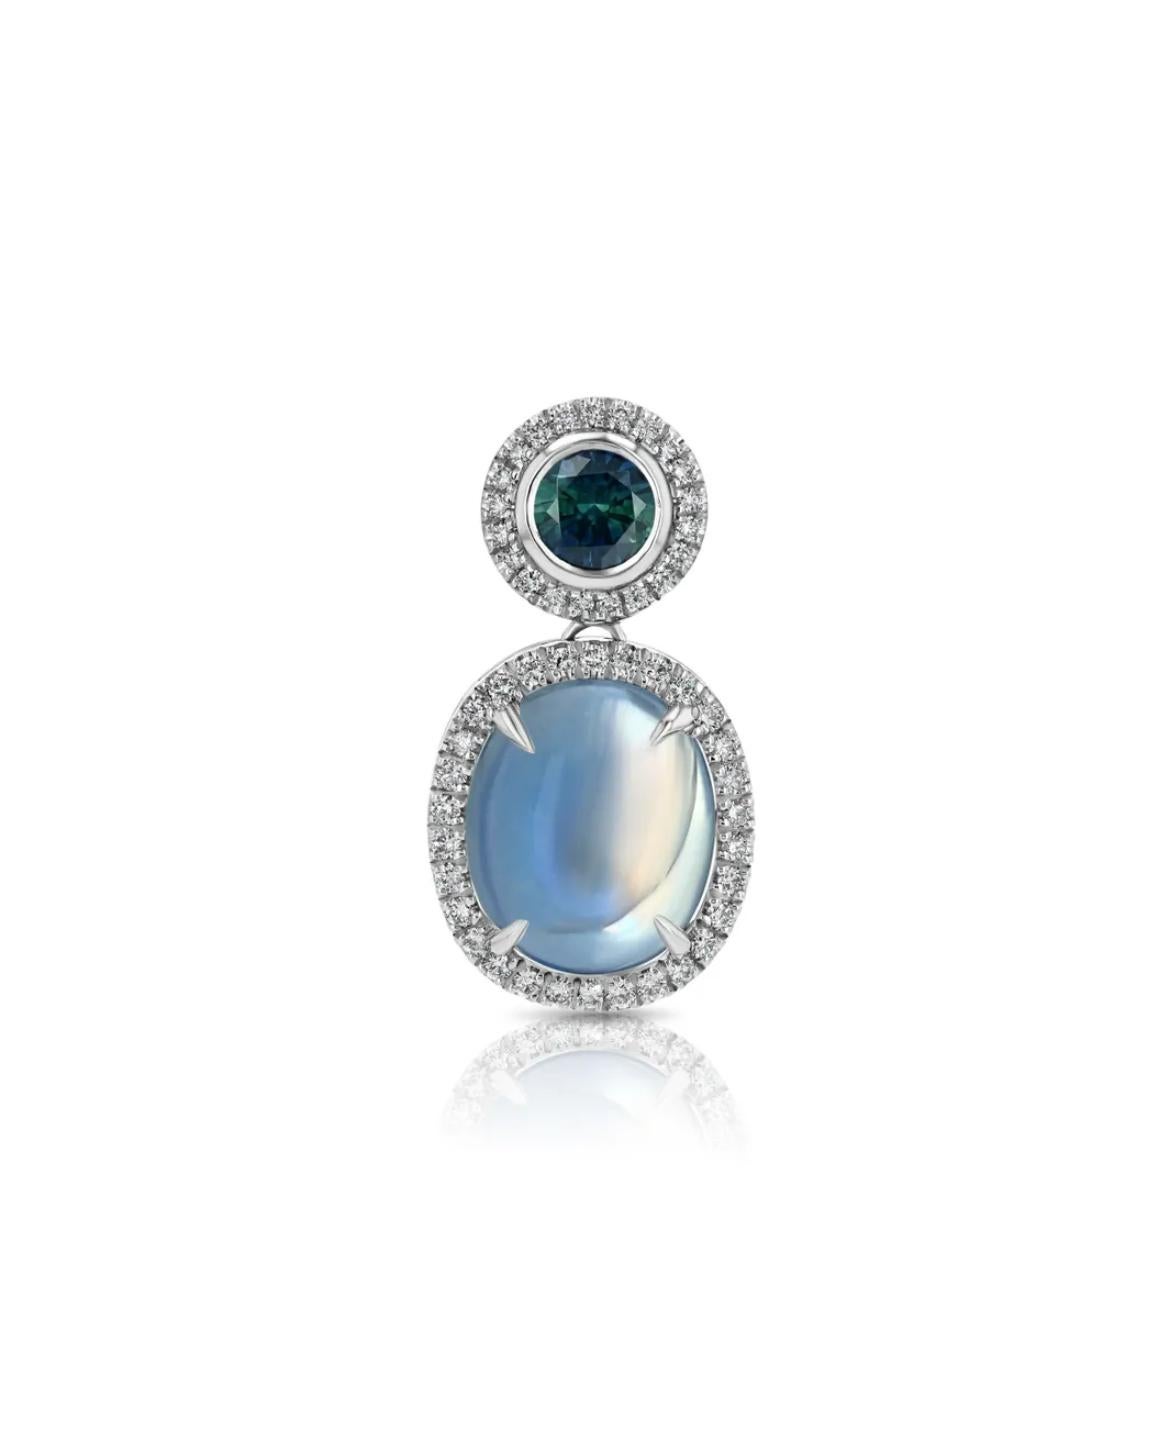 Cabochon 5.44ct Moonstone and 0.63ct Montana Sapphire pendant in 18K white gold.  For Sale